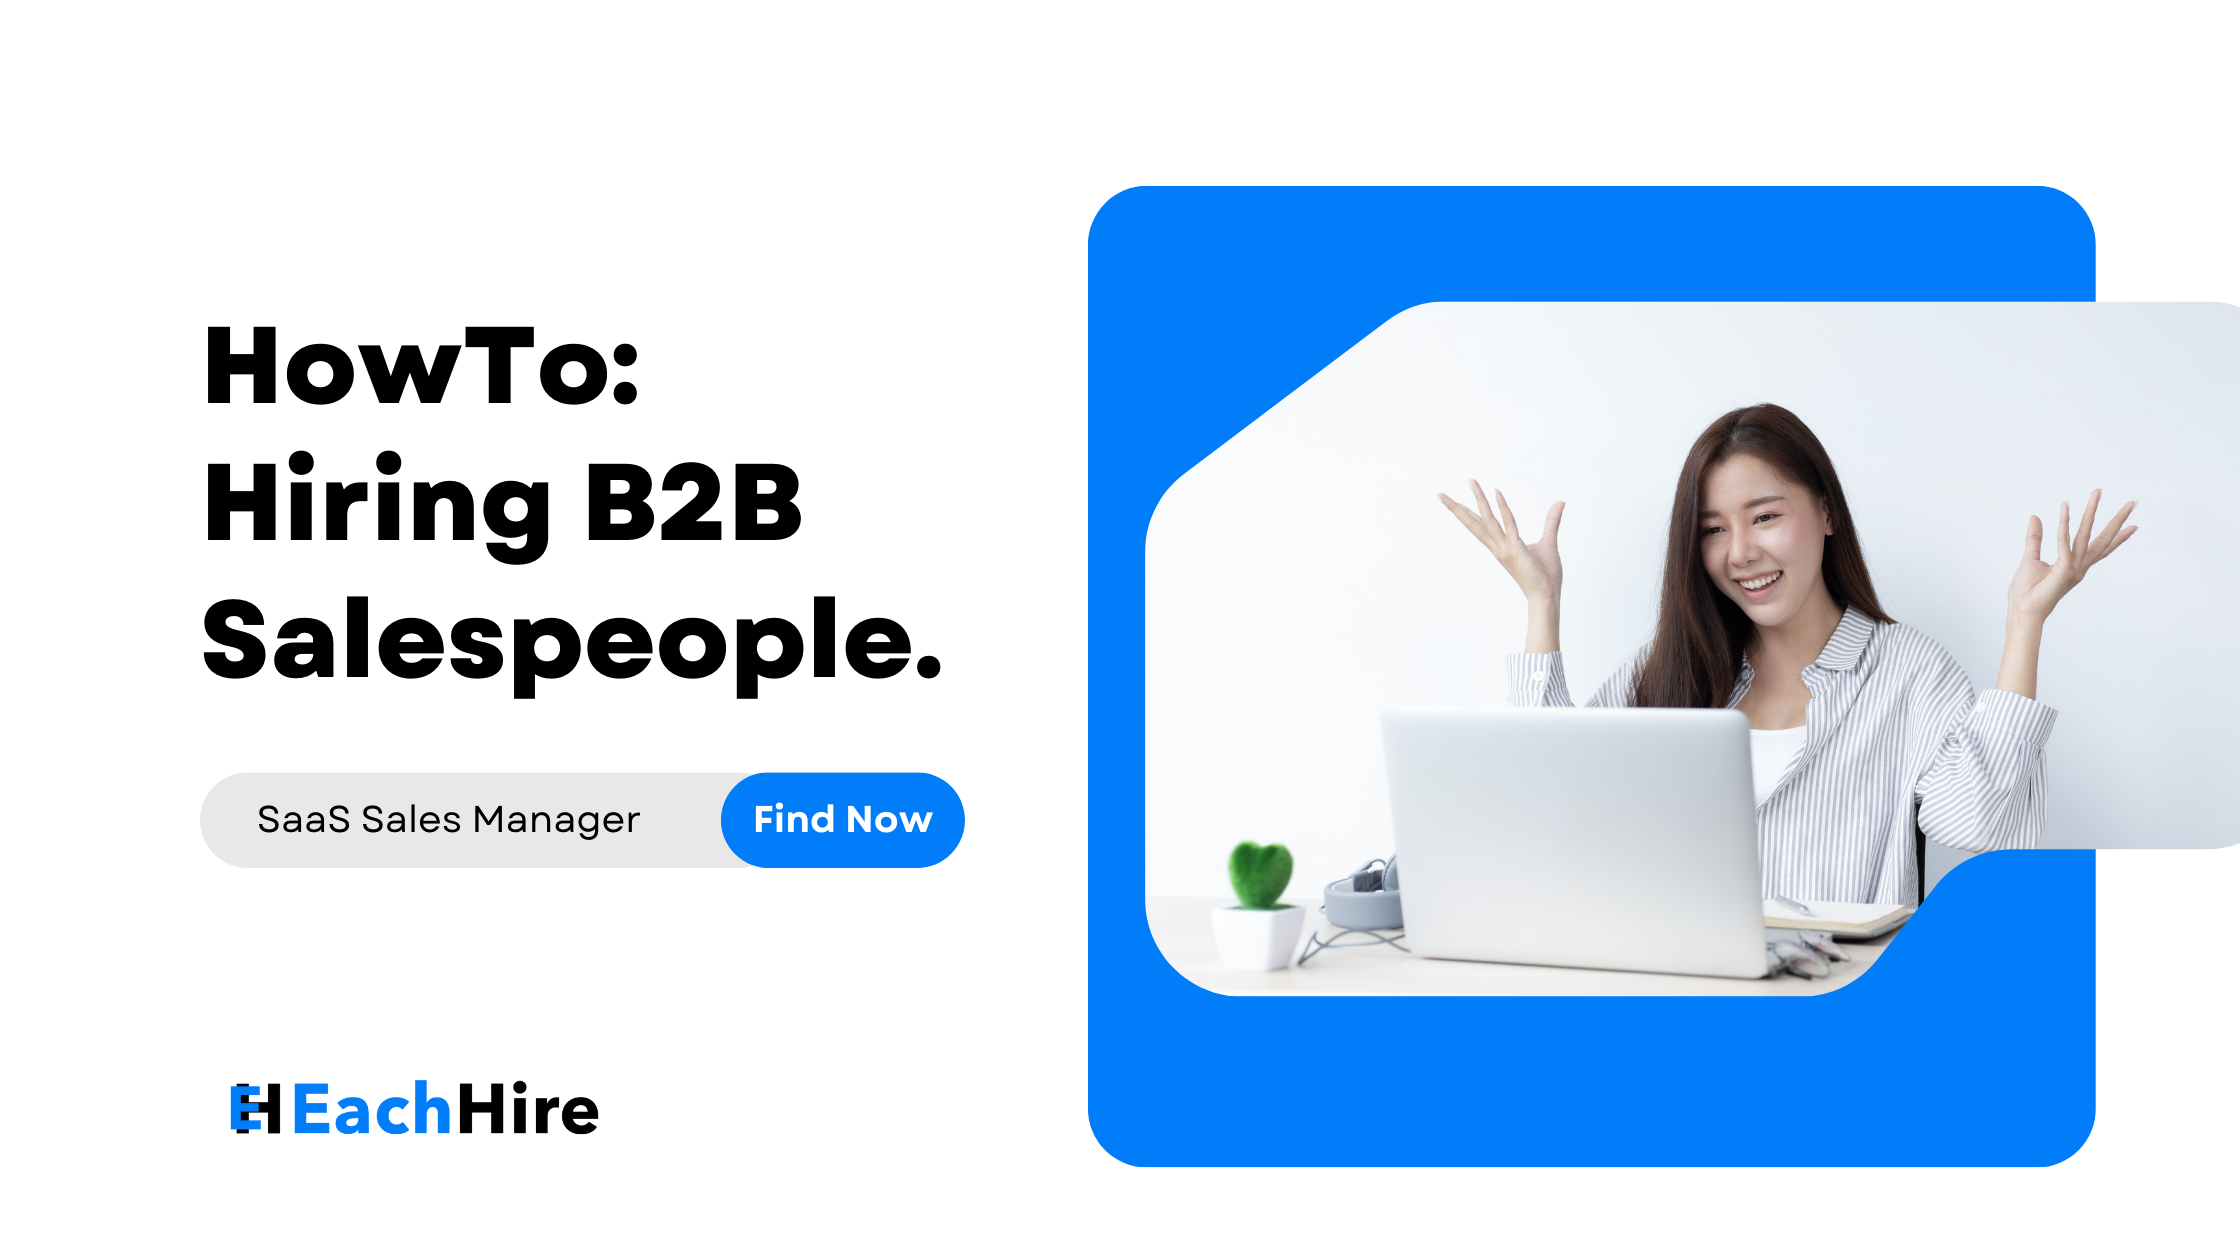 How to find and hire the right B2B Salespeople